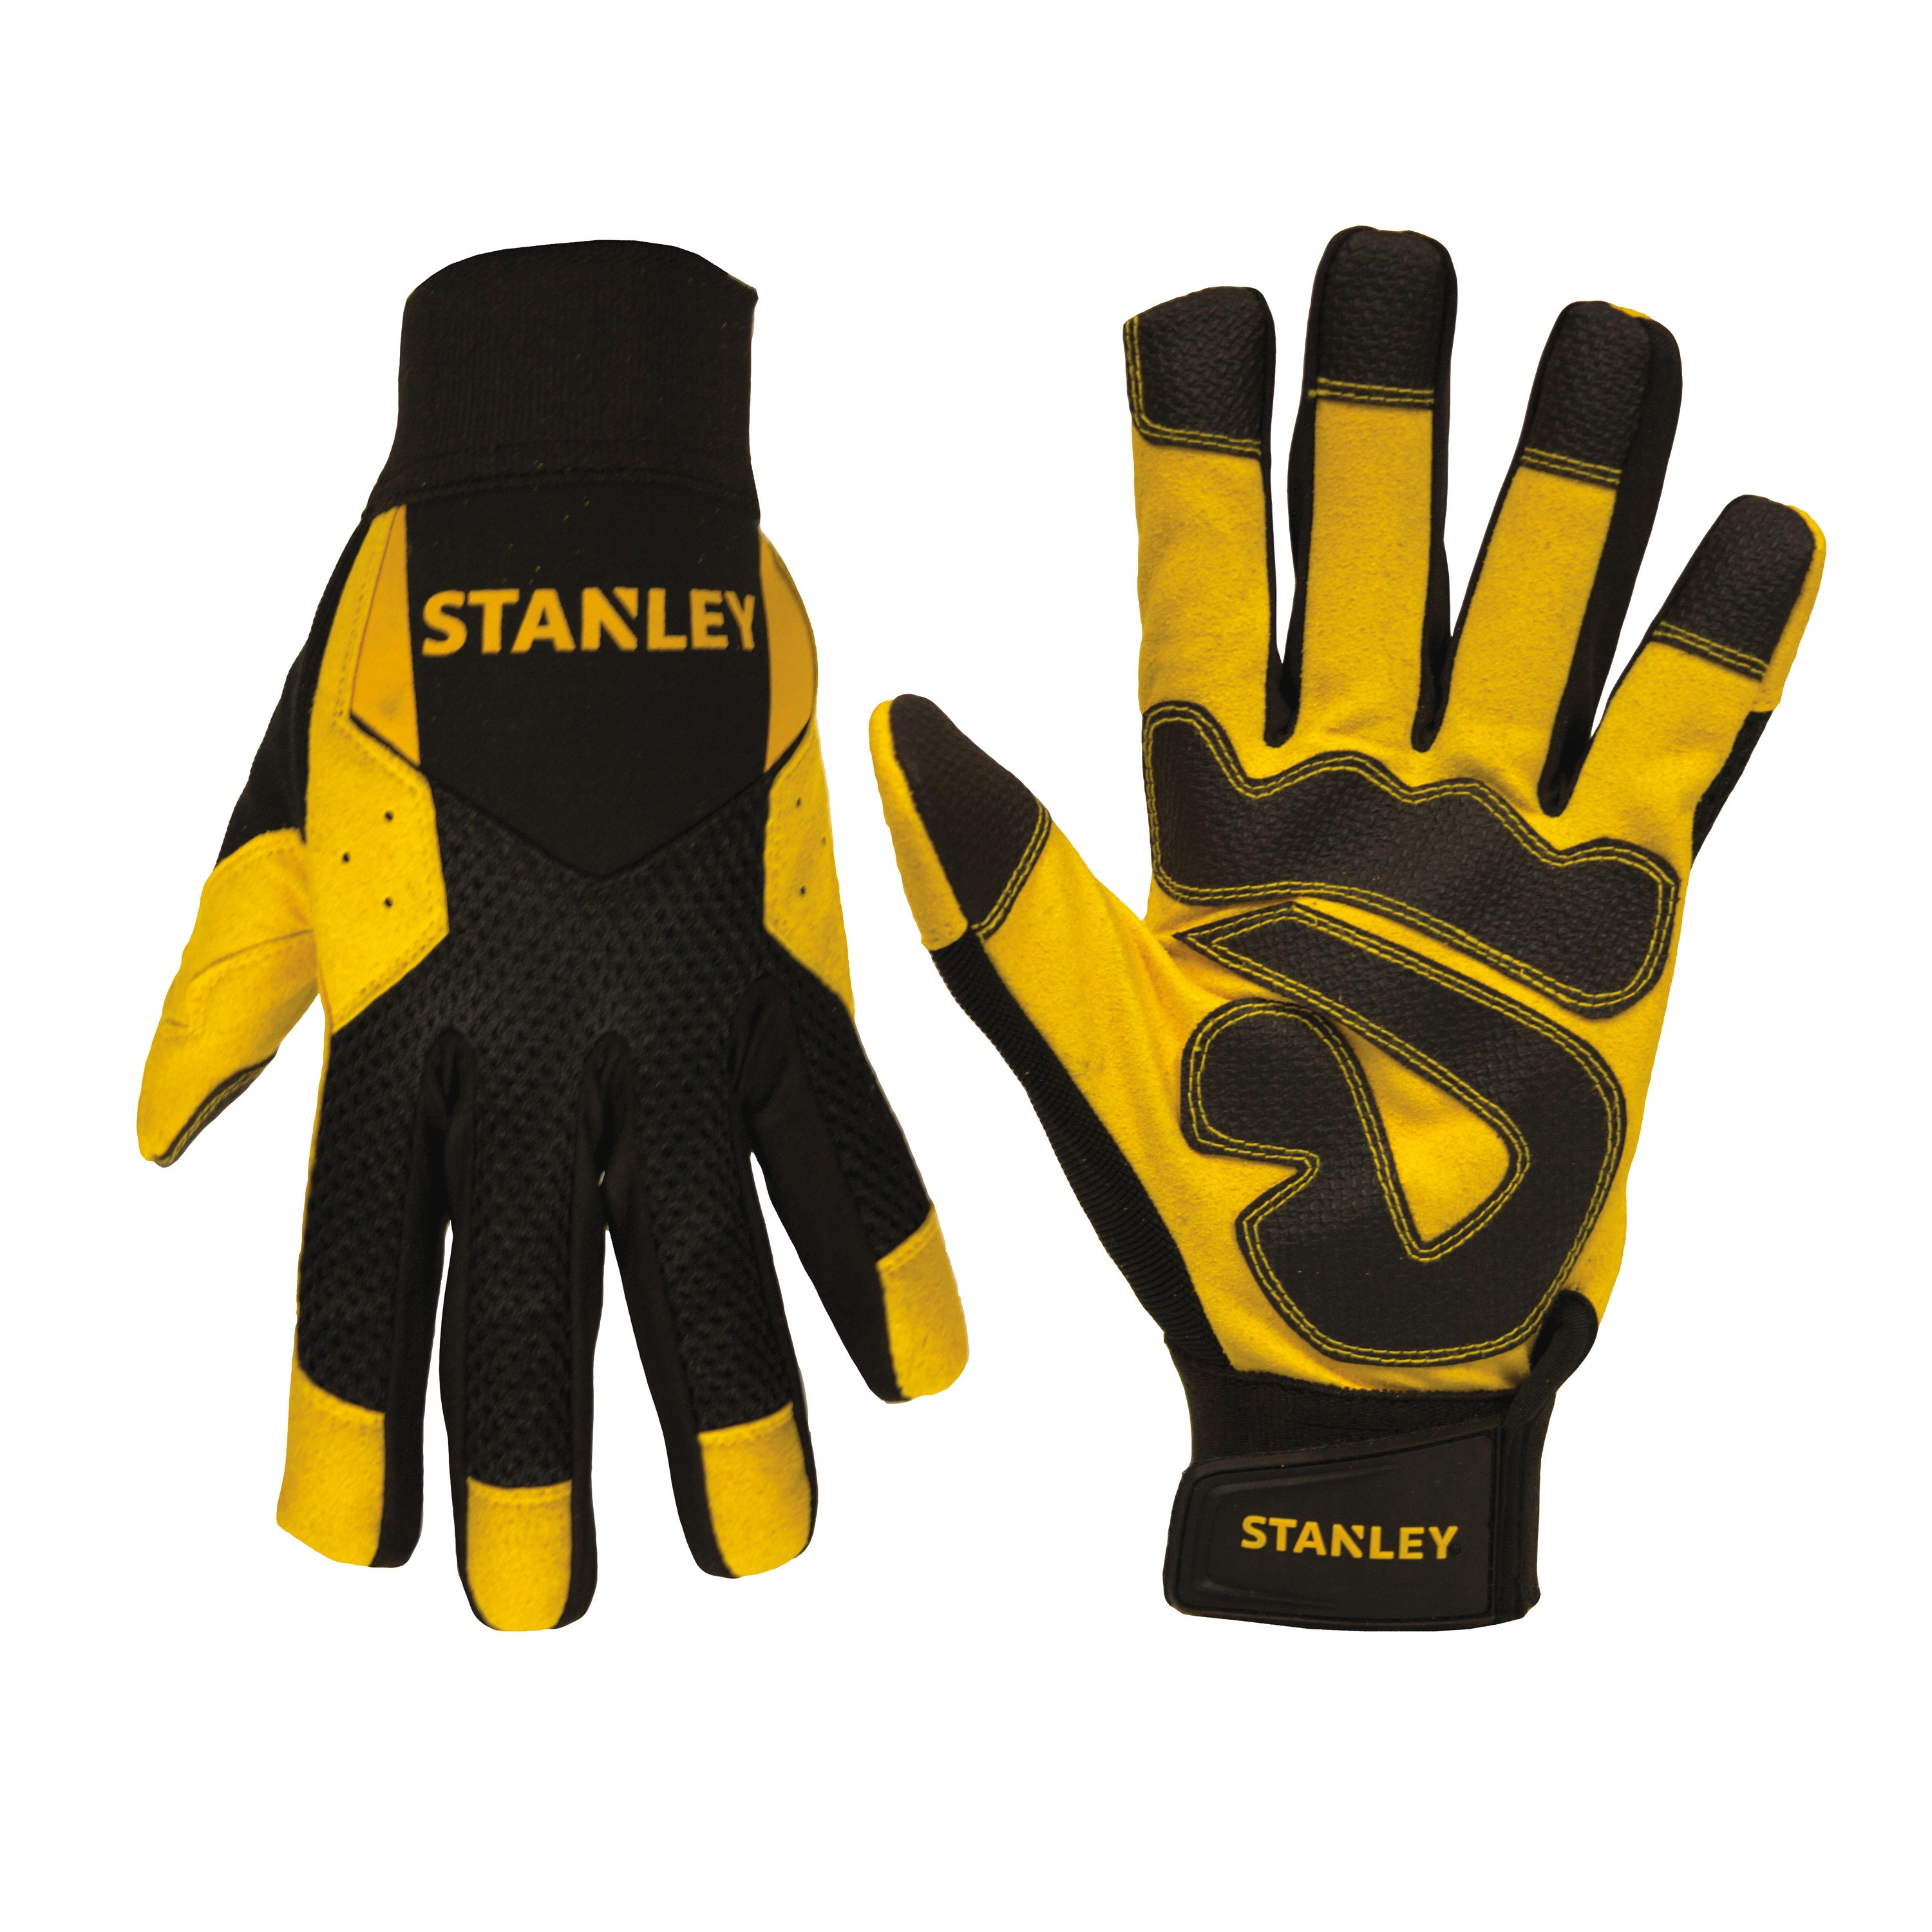 Stanley Work Gloves with Synthetic Leather Comfort Grip CORDOVA CONSUMER PRO S77612 